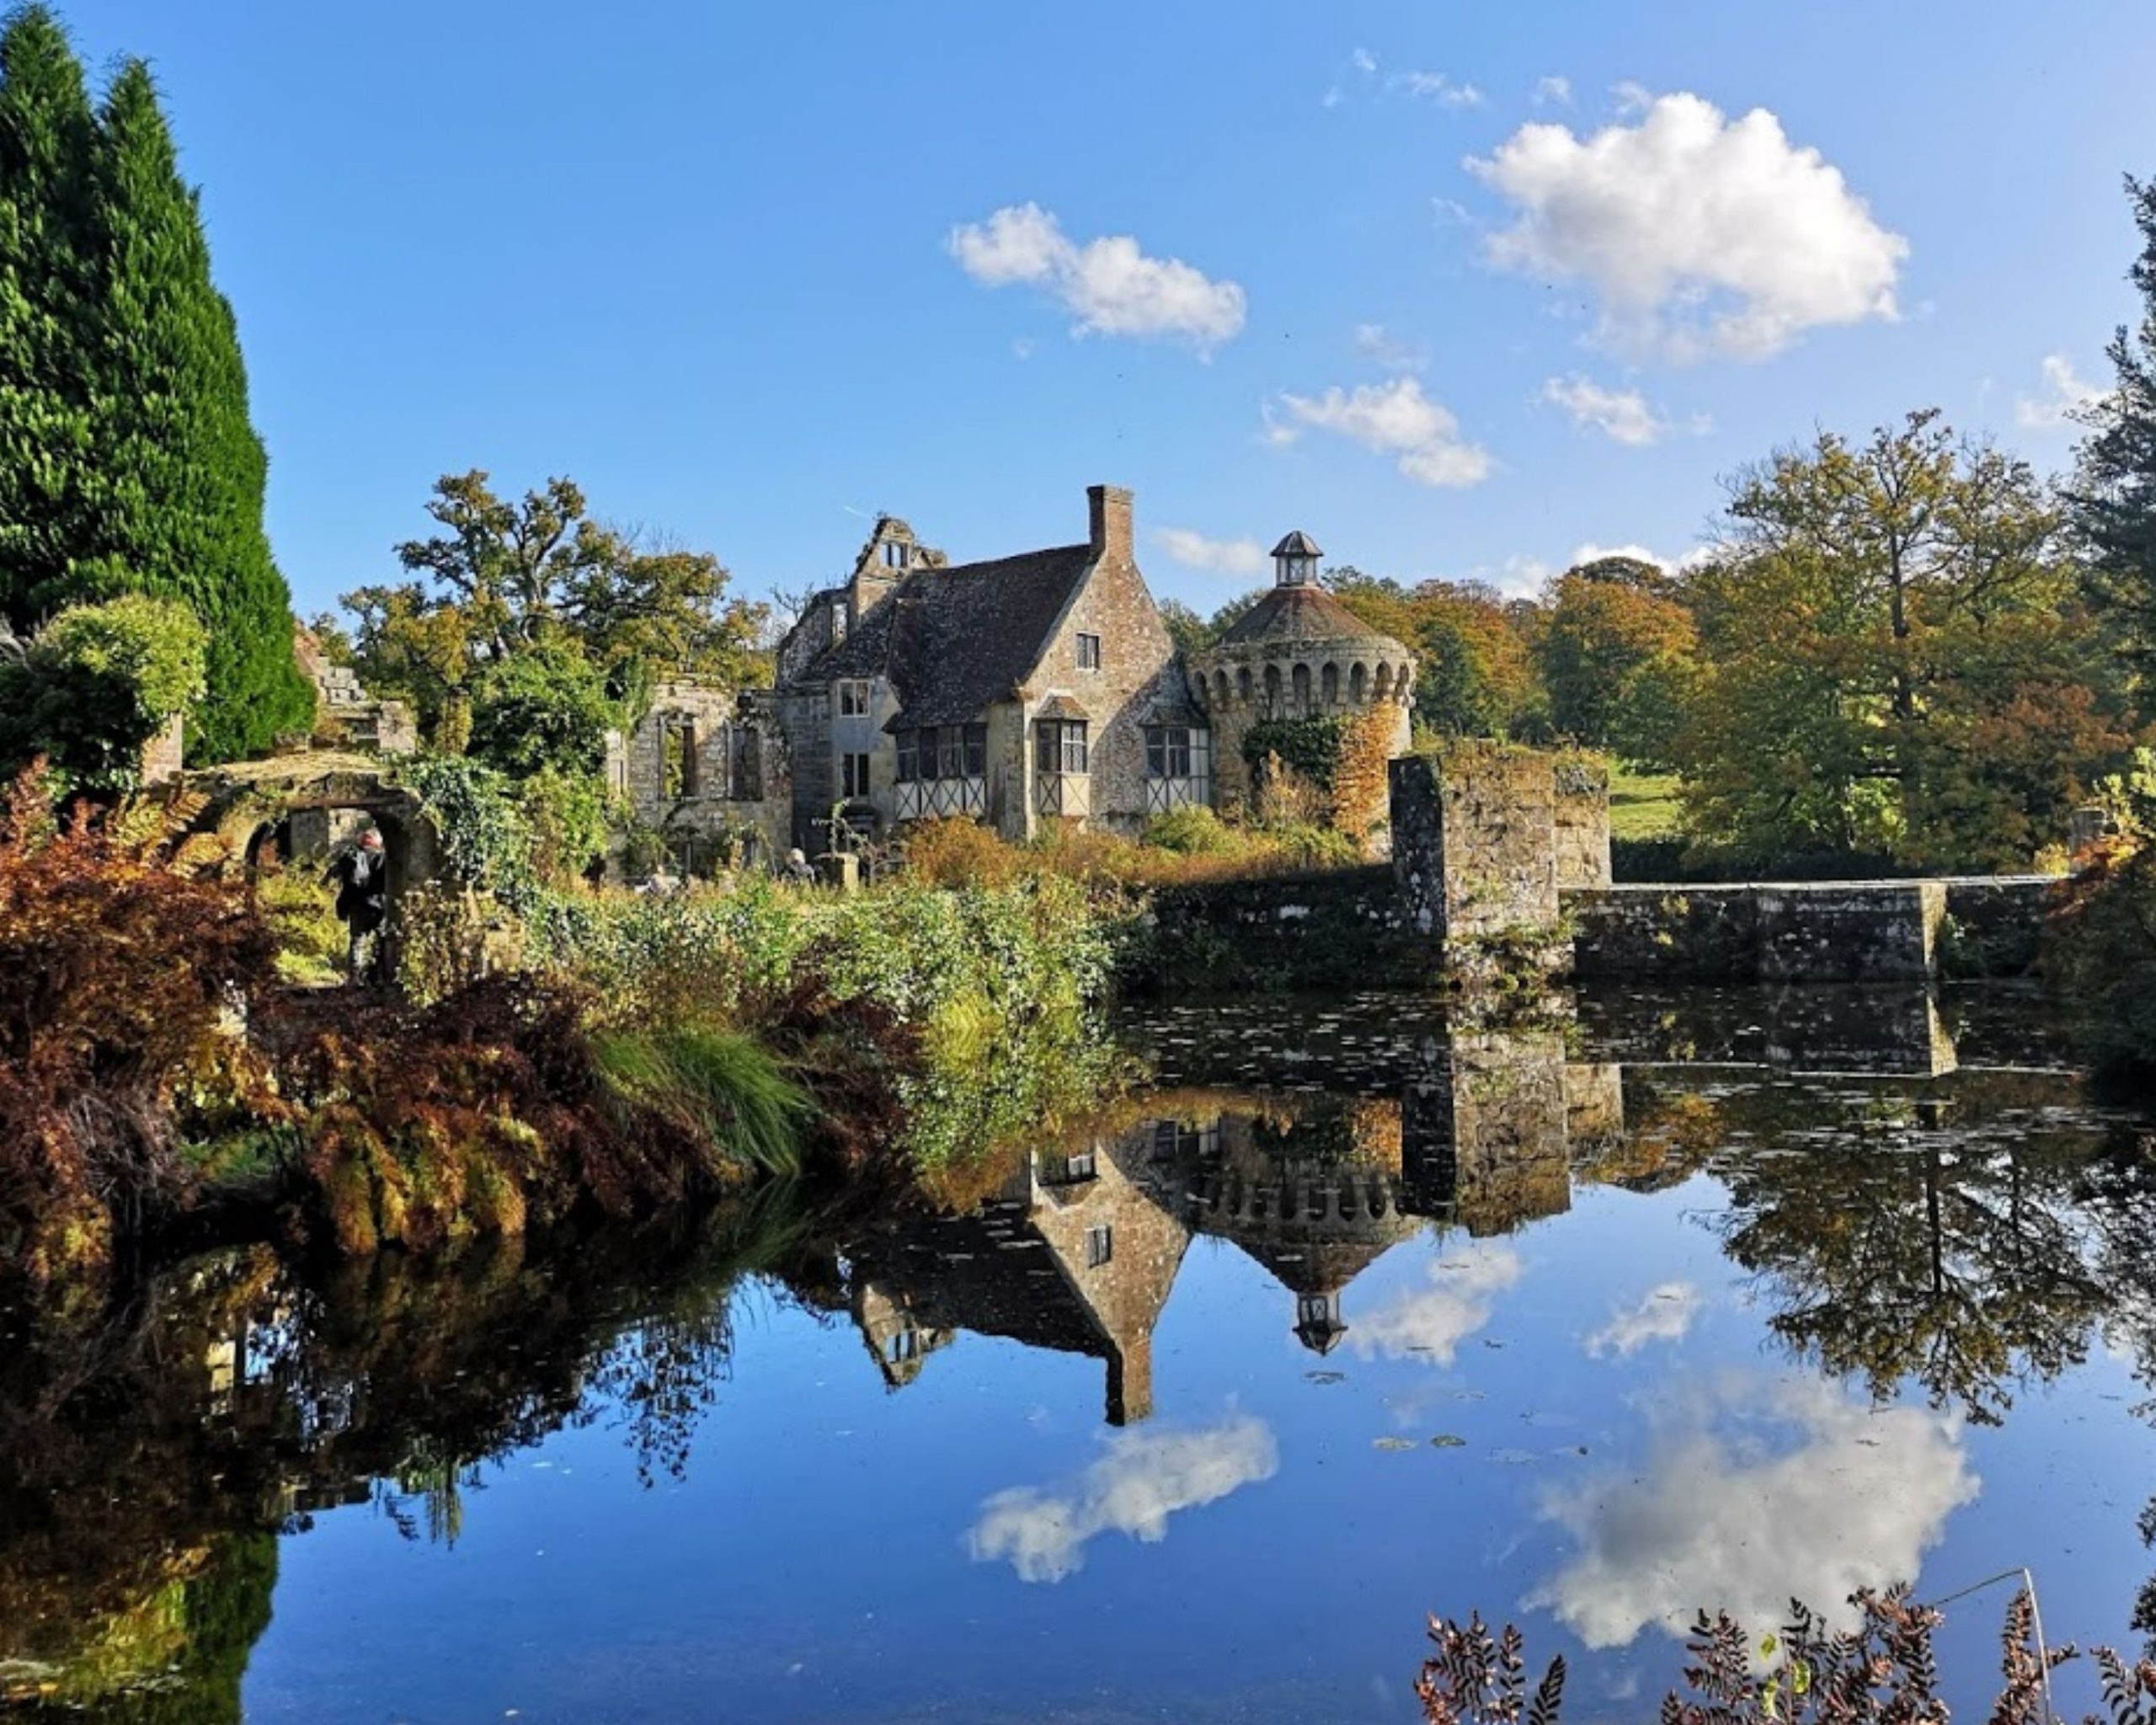 Scotney Castle reflected in the moat waters